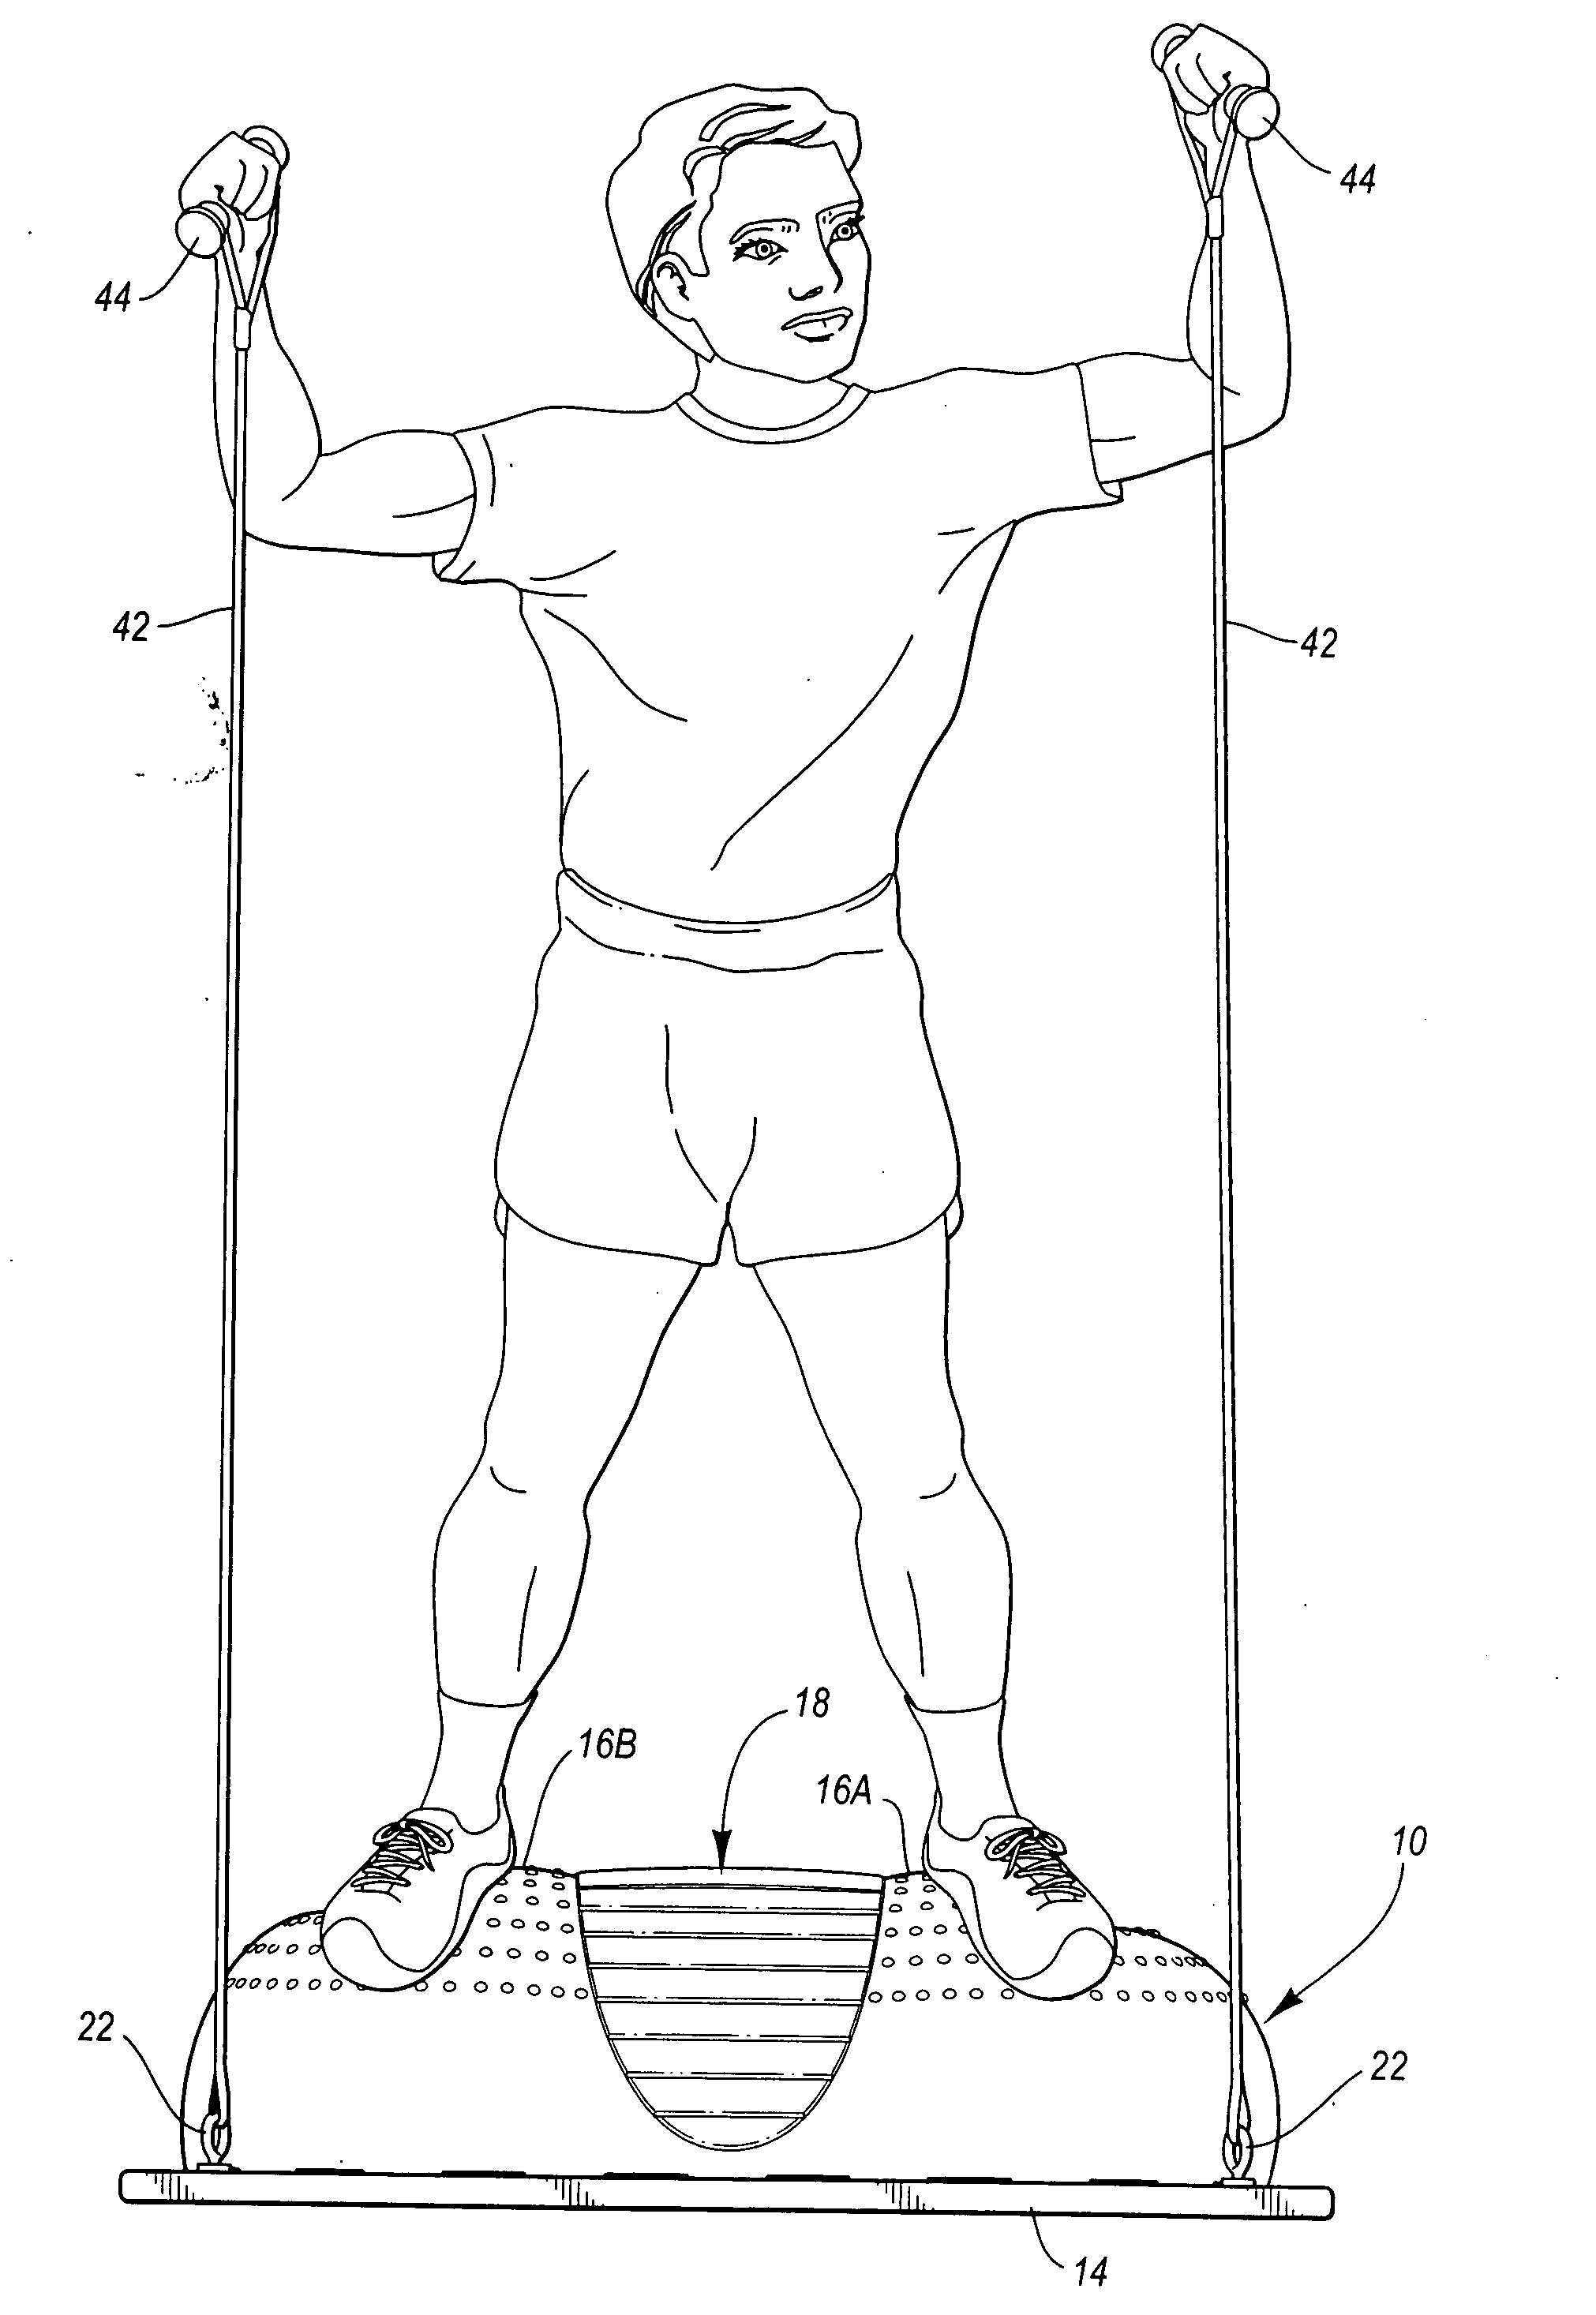 Exercise device with elongate flexible member